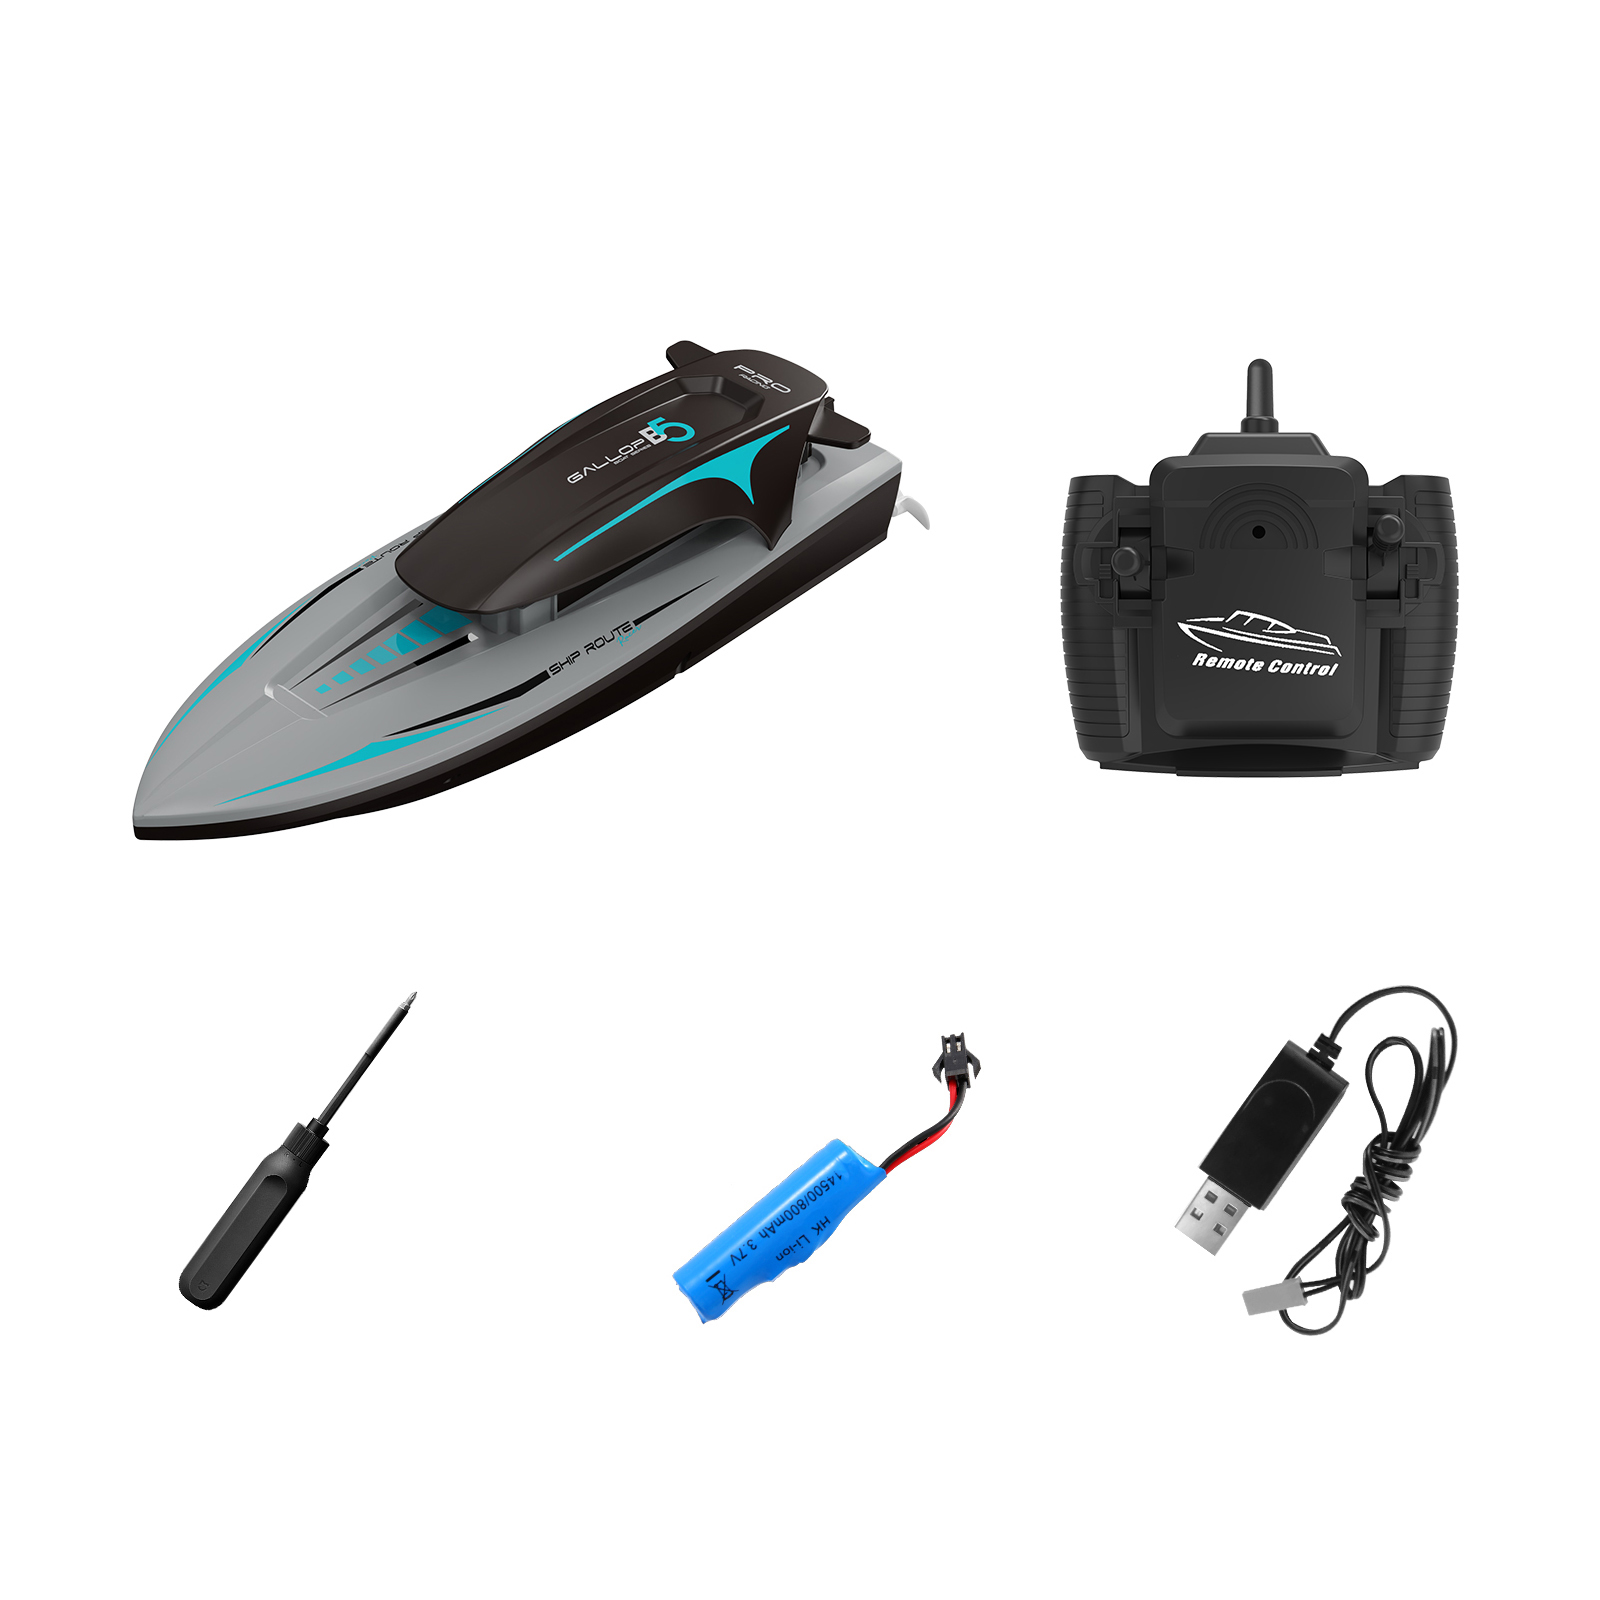 B5 Remote Control Speedboat with Lights 4 Channels Dual Motor 2.4 Ghz Remote Control Boat